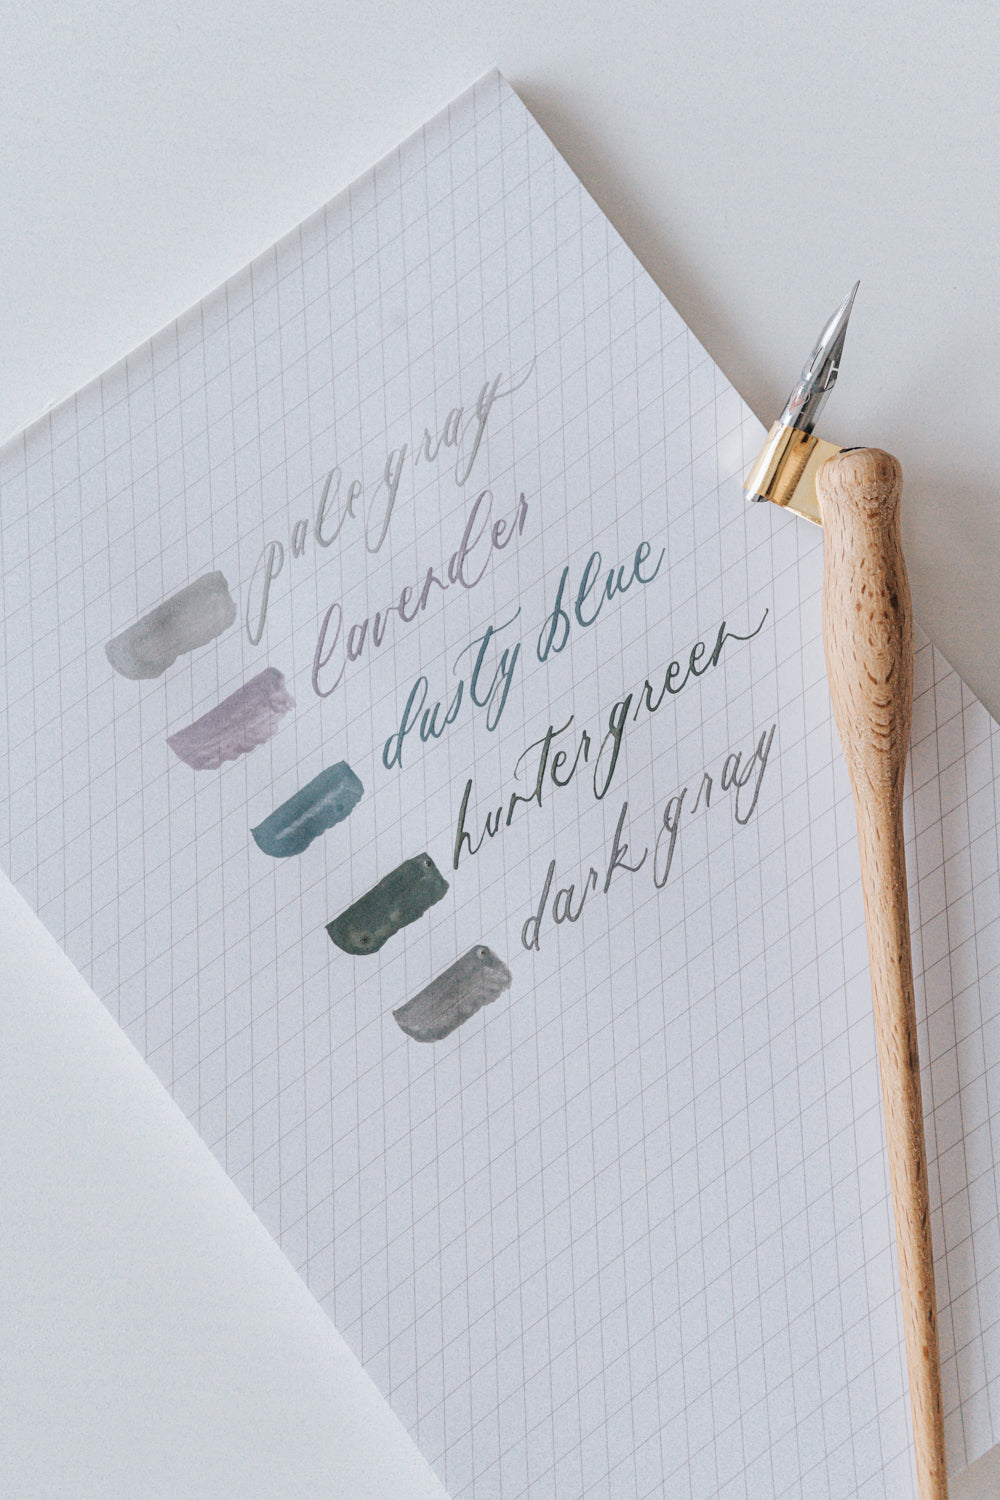 Calligraphy Ink: Rich and Vibrant Colors for Stunning Lettering